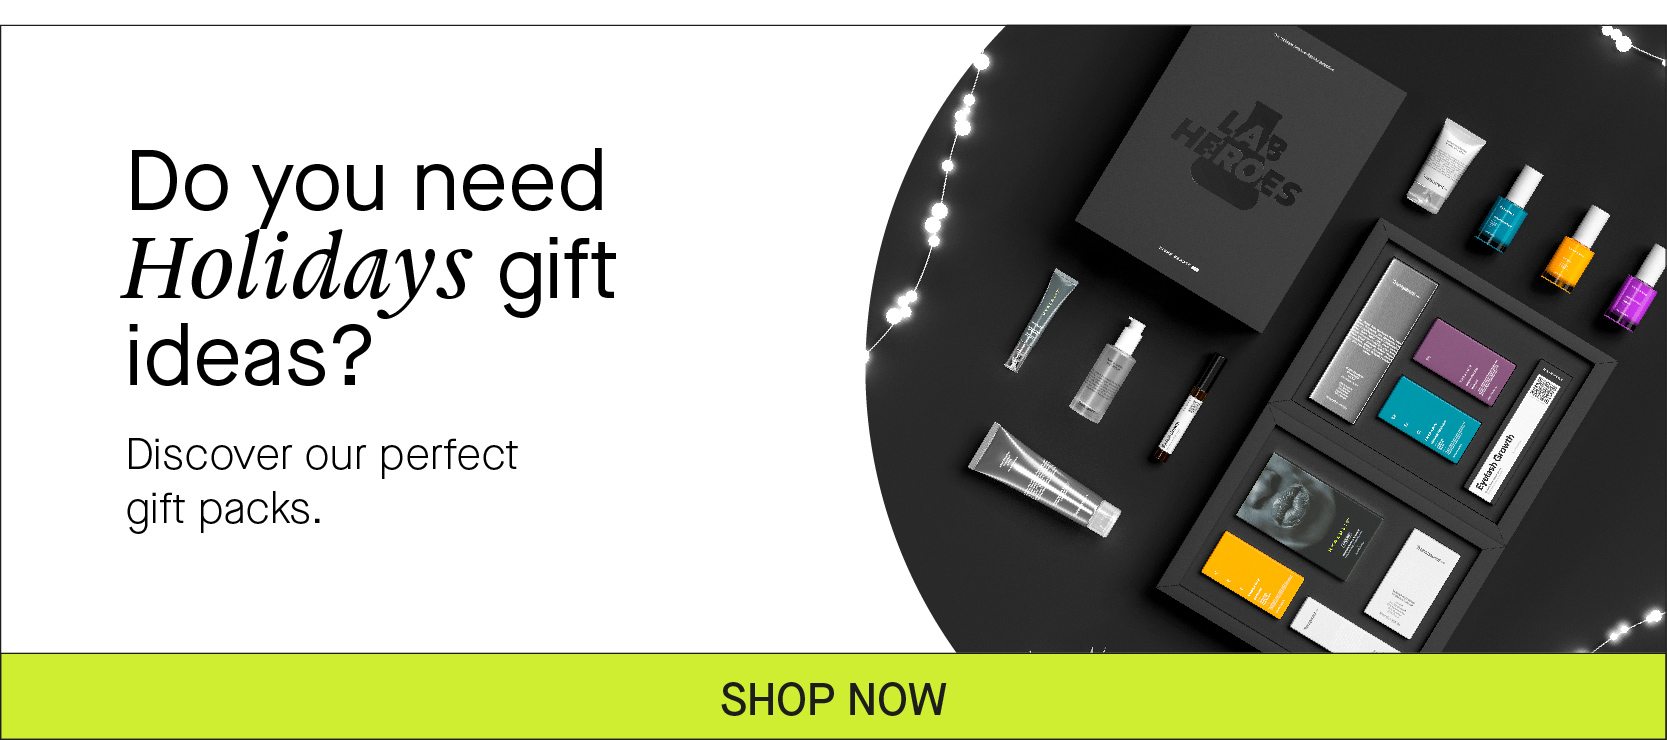  Do you need Holidays gift ideas? Discover our perfect gift packs. SHOP NOW 